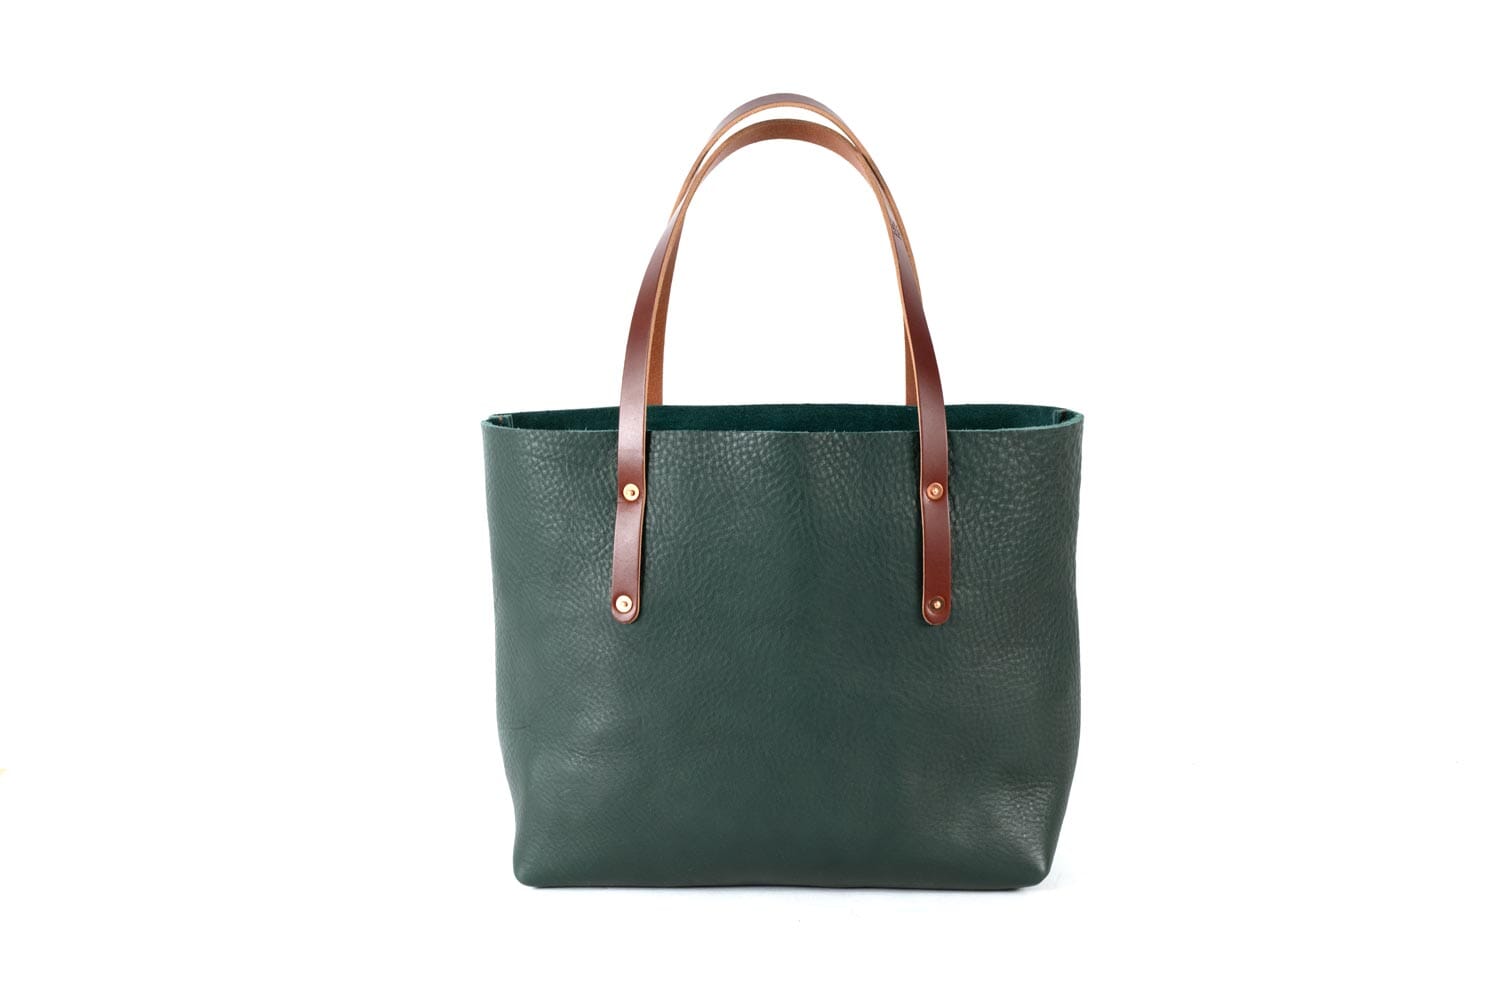 AVERY LEATHER TOTE BAG - LARGE - FOREST GREEN